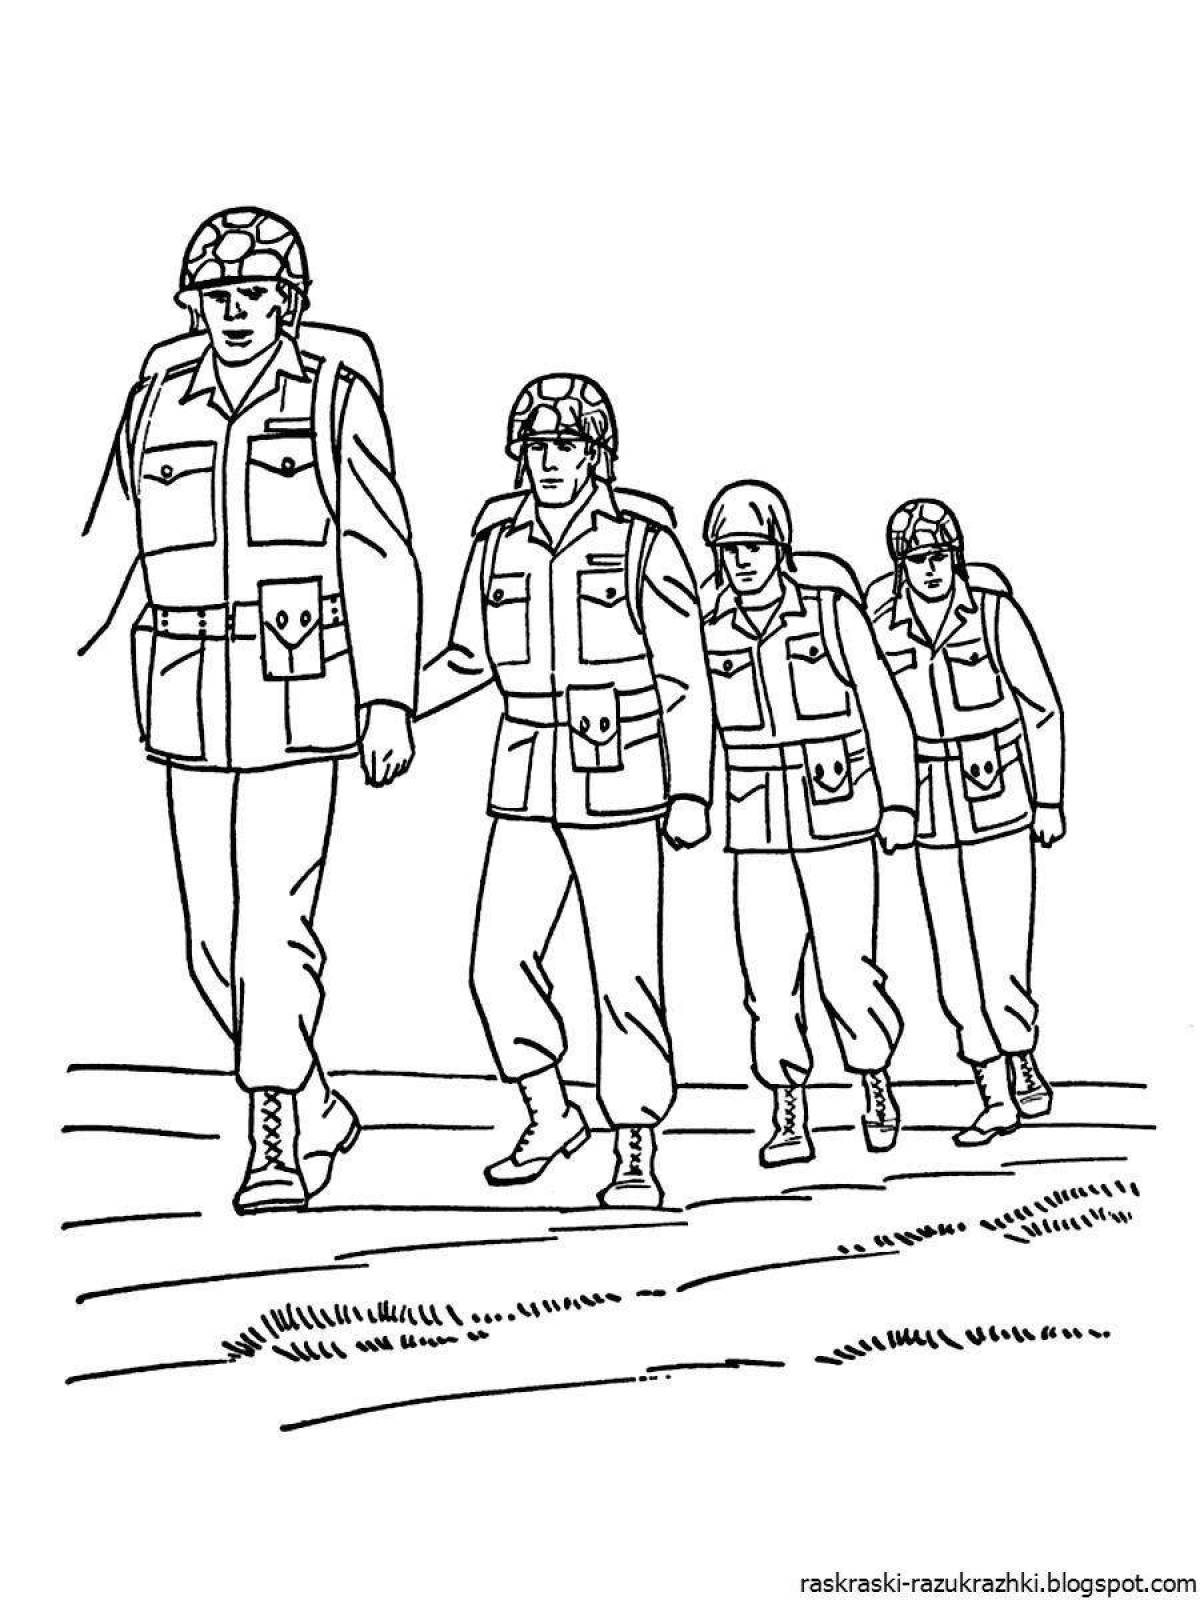 Joyful army coloring page